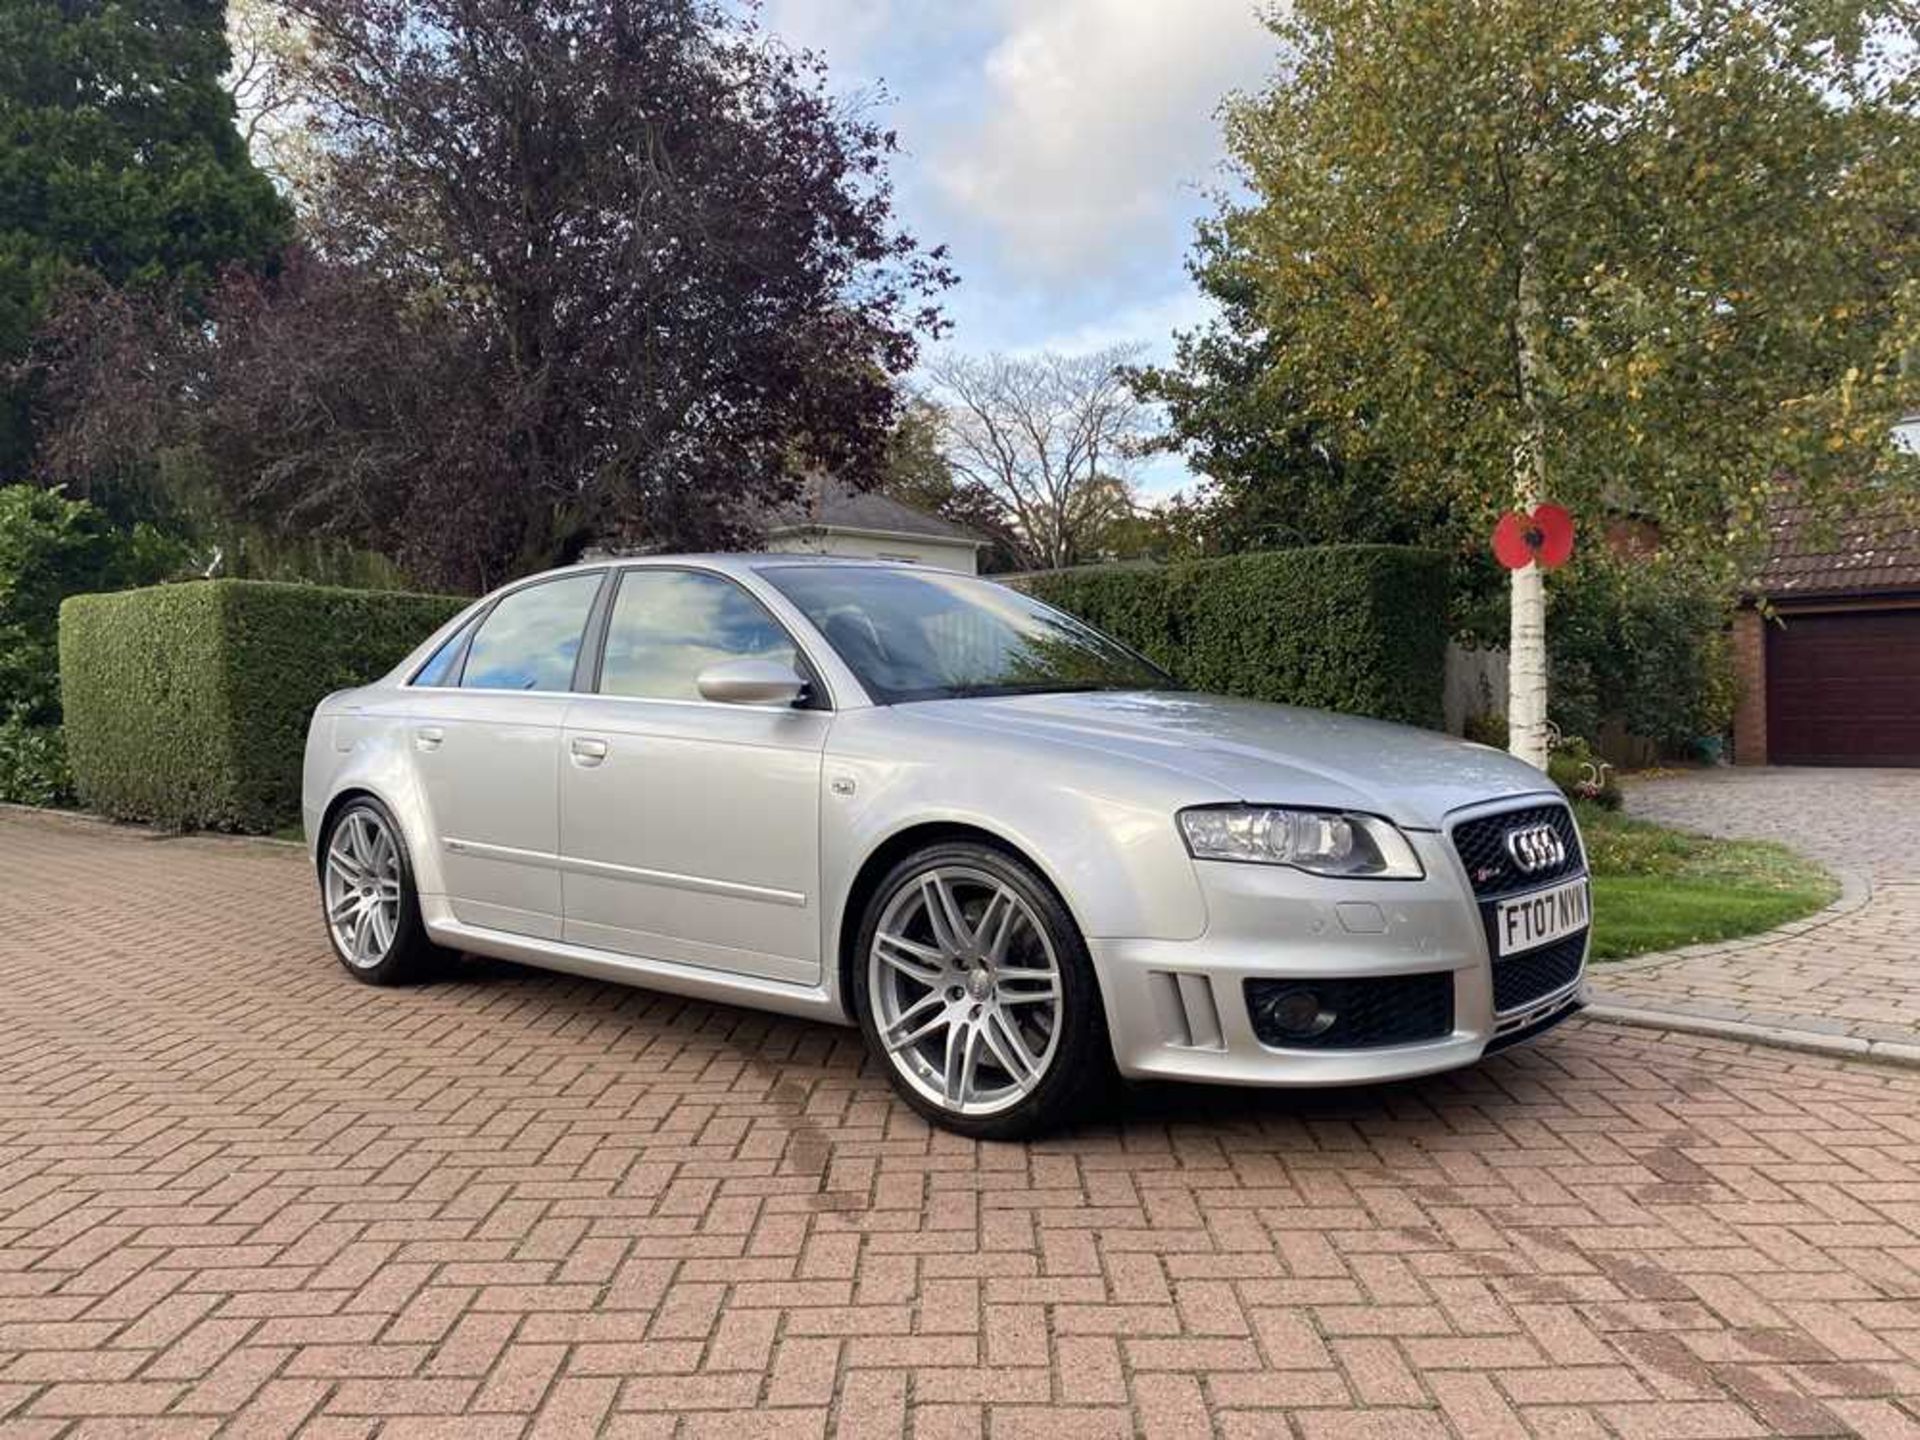 2007 Audi RS4 Saloon One owner and just c.60,000 miles from new - Image 5 of 86